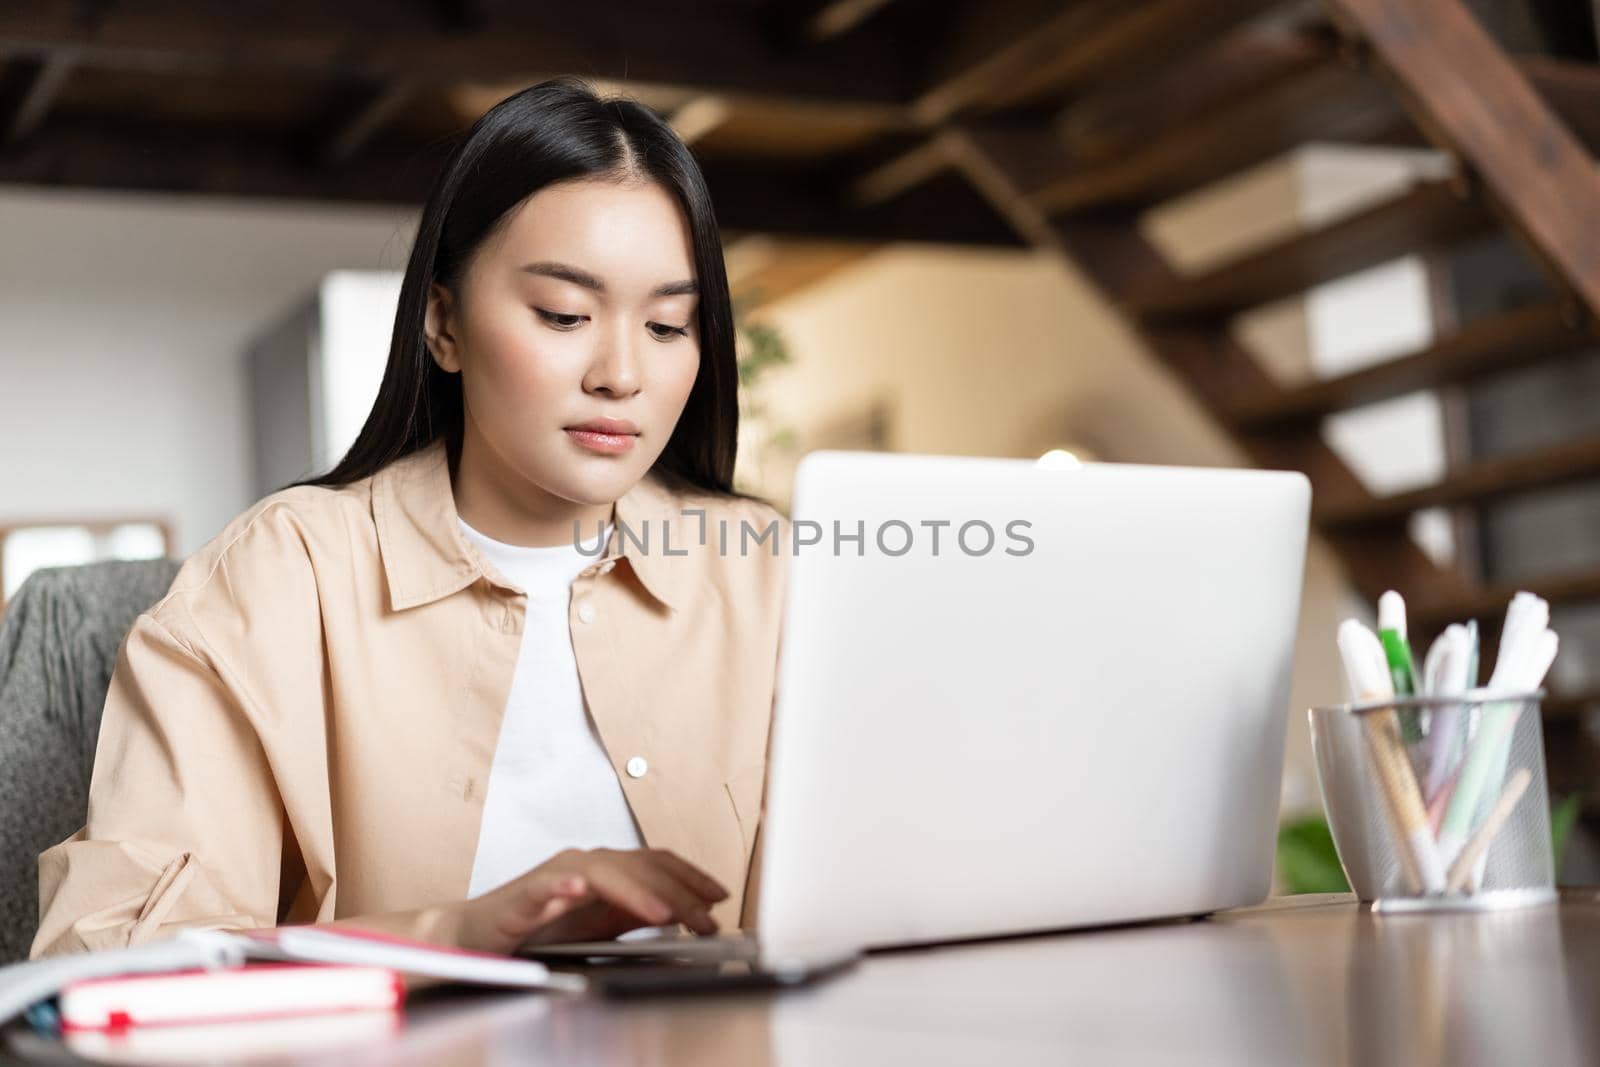 Busy young asian woman working from home, using laptop, sitting at table with books and pencils, typing on computer keyboard.